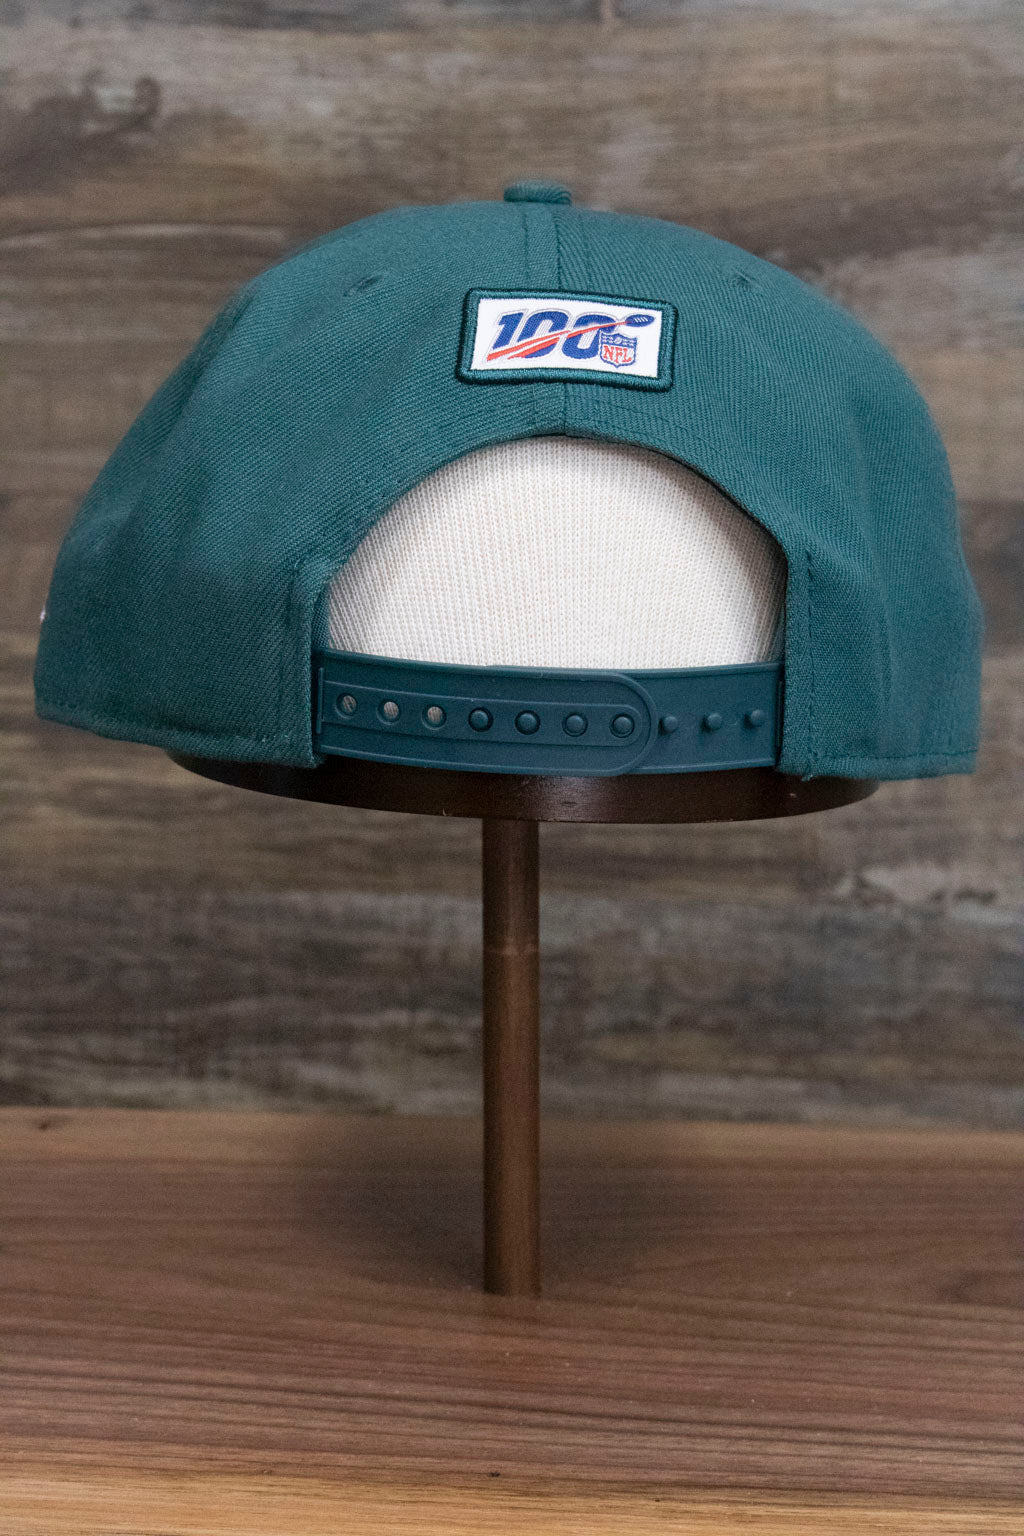 the back of the Philadelphia Eagles NFL Draft 2019 Snapback Hat | Philly Eagles Midnight Green 9Fifty Snapback Draft Hat has an NFL 100 patch and a plastic adjustable strap